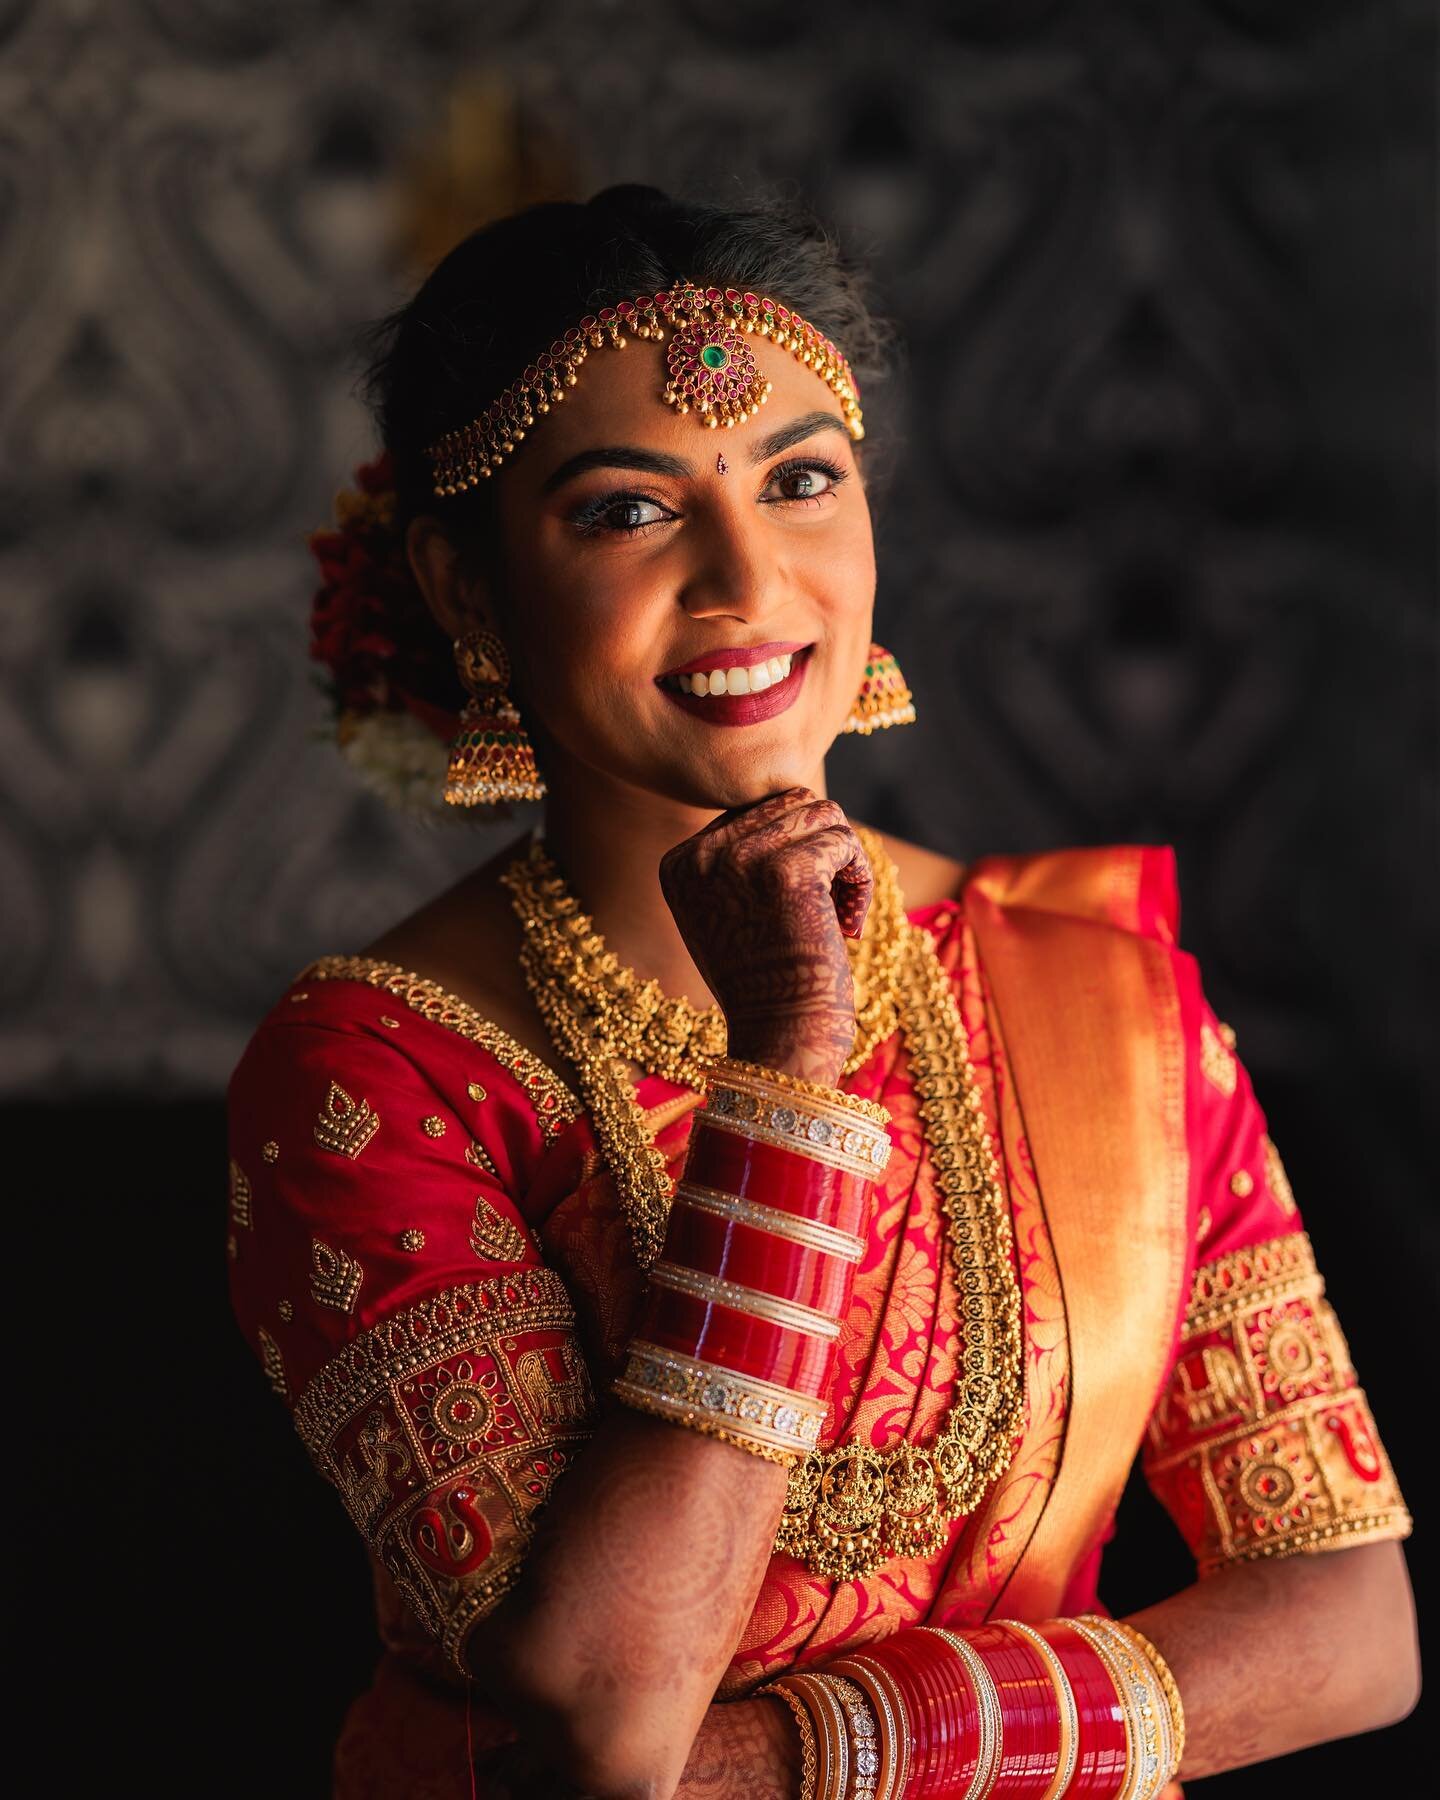 Bride Dhivya dolled up for her big day ❤️❤️❤️
.
.
#southindianbrides #lionsgatecenter #denverbrides #denverbridetobe #denverbride2022 #coloradobride #coloradobridesmag #coloradobrides #denverengagement #denverweddingphotographer #denverweddingphotogr